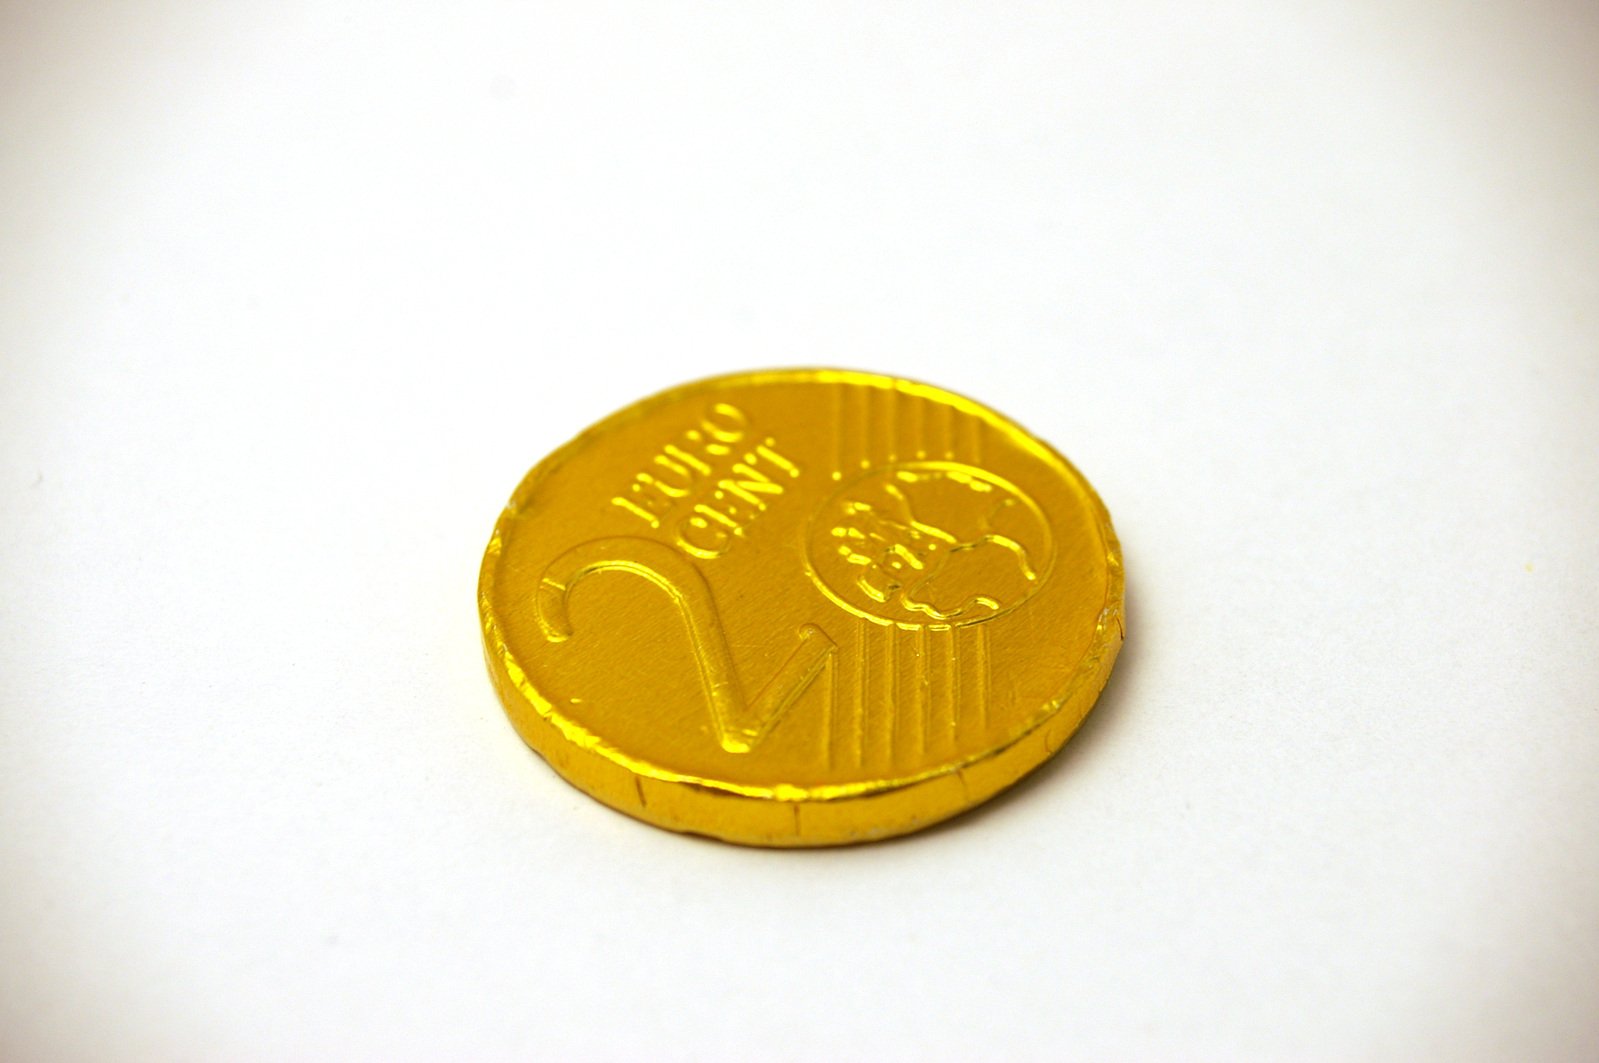 a round golden token coin sitting on a white surface